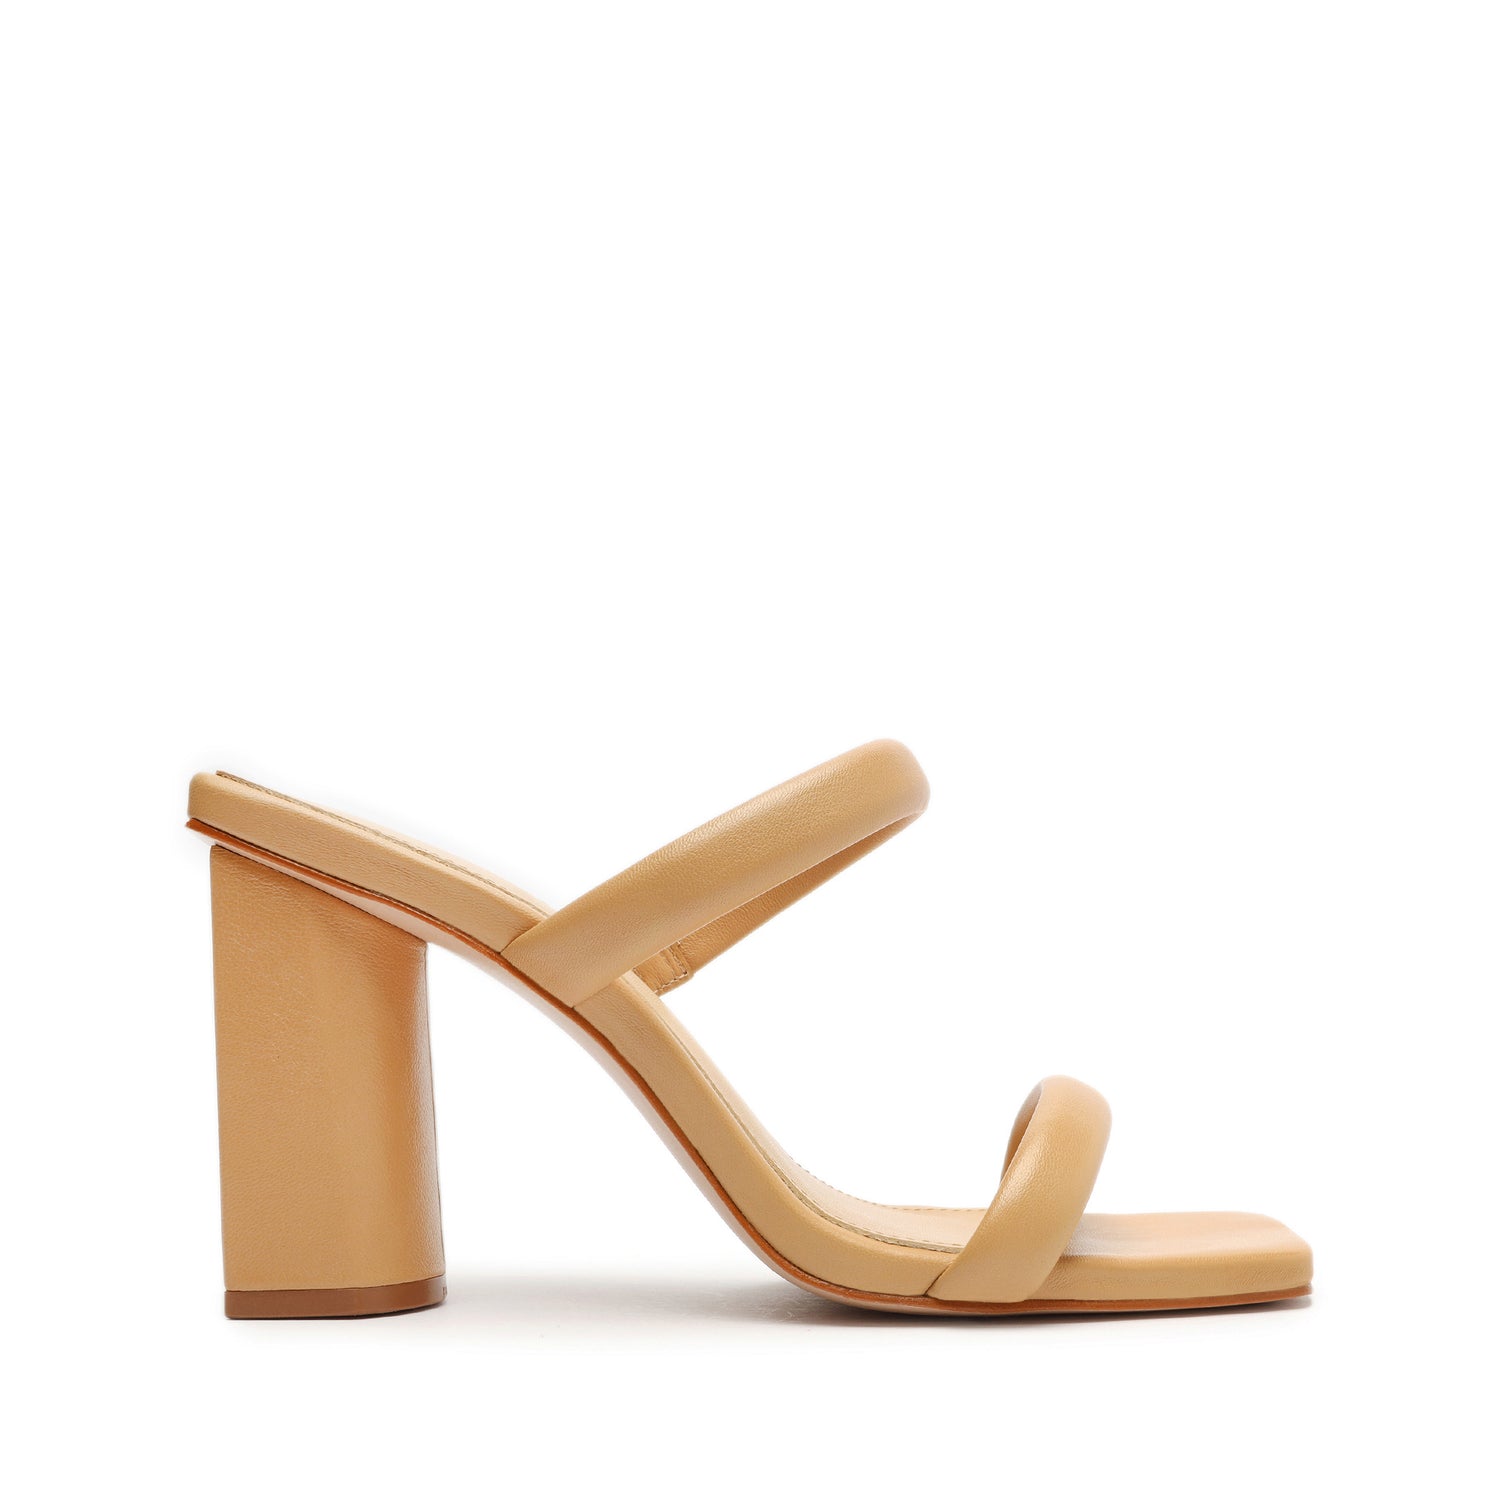 Ully Nappa Leather Sandal Sandals CO 5 Light Beige Leather - Schutz Shoes